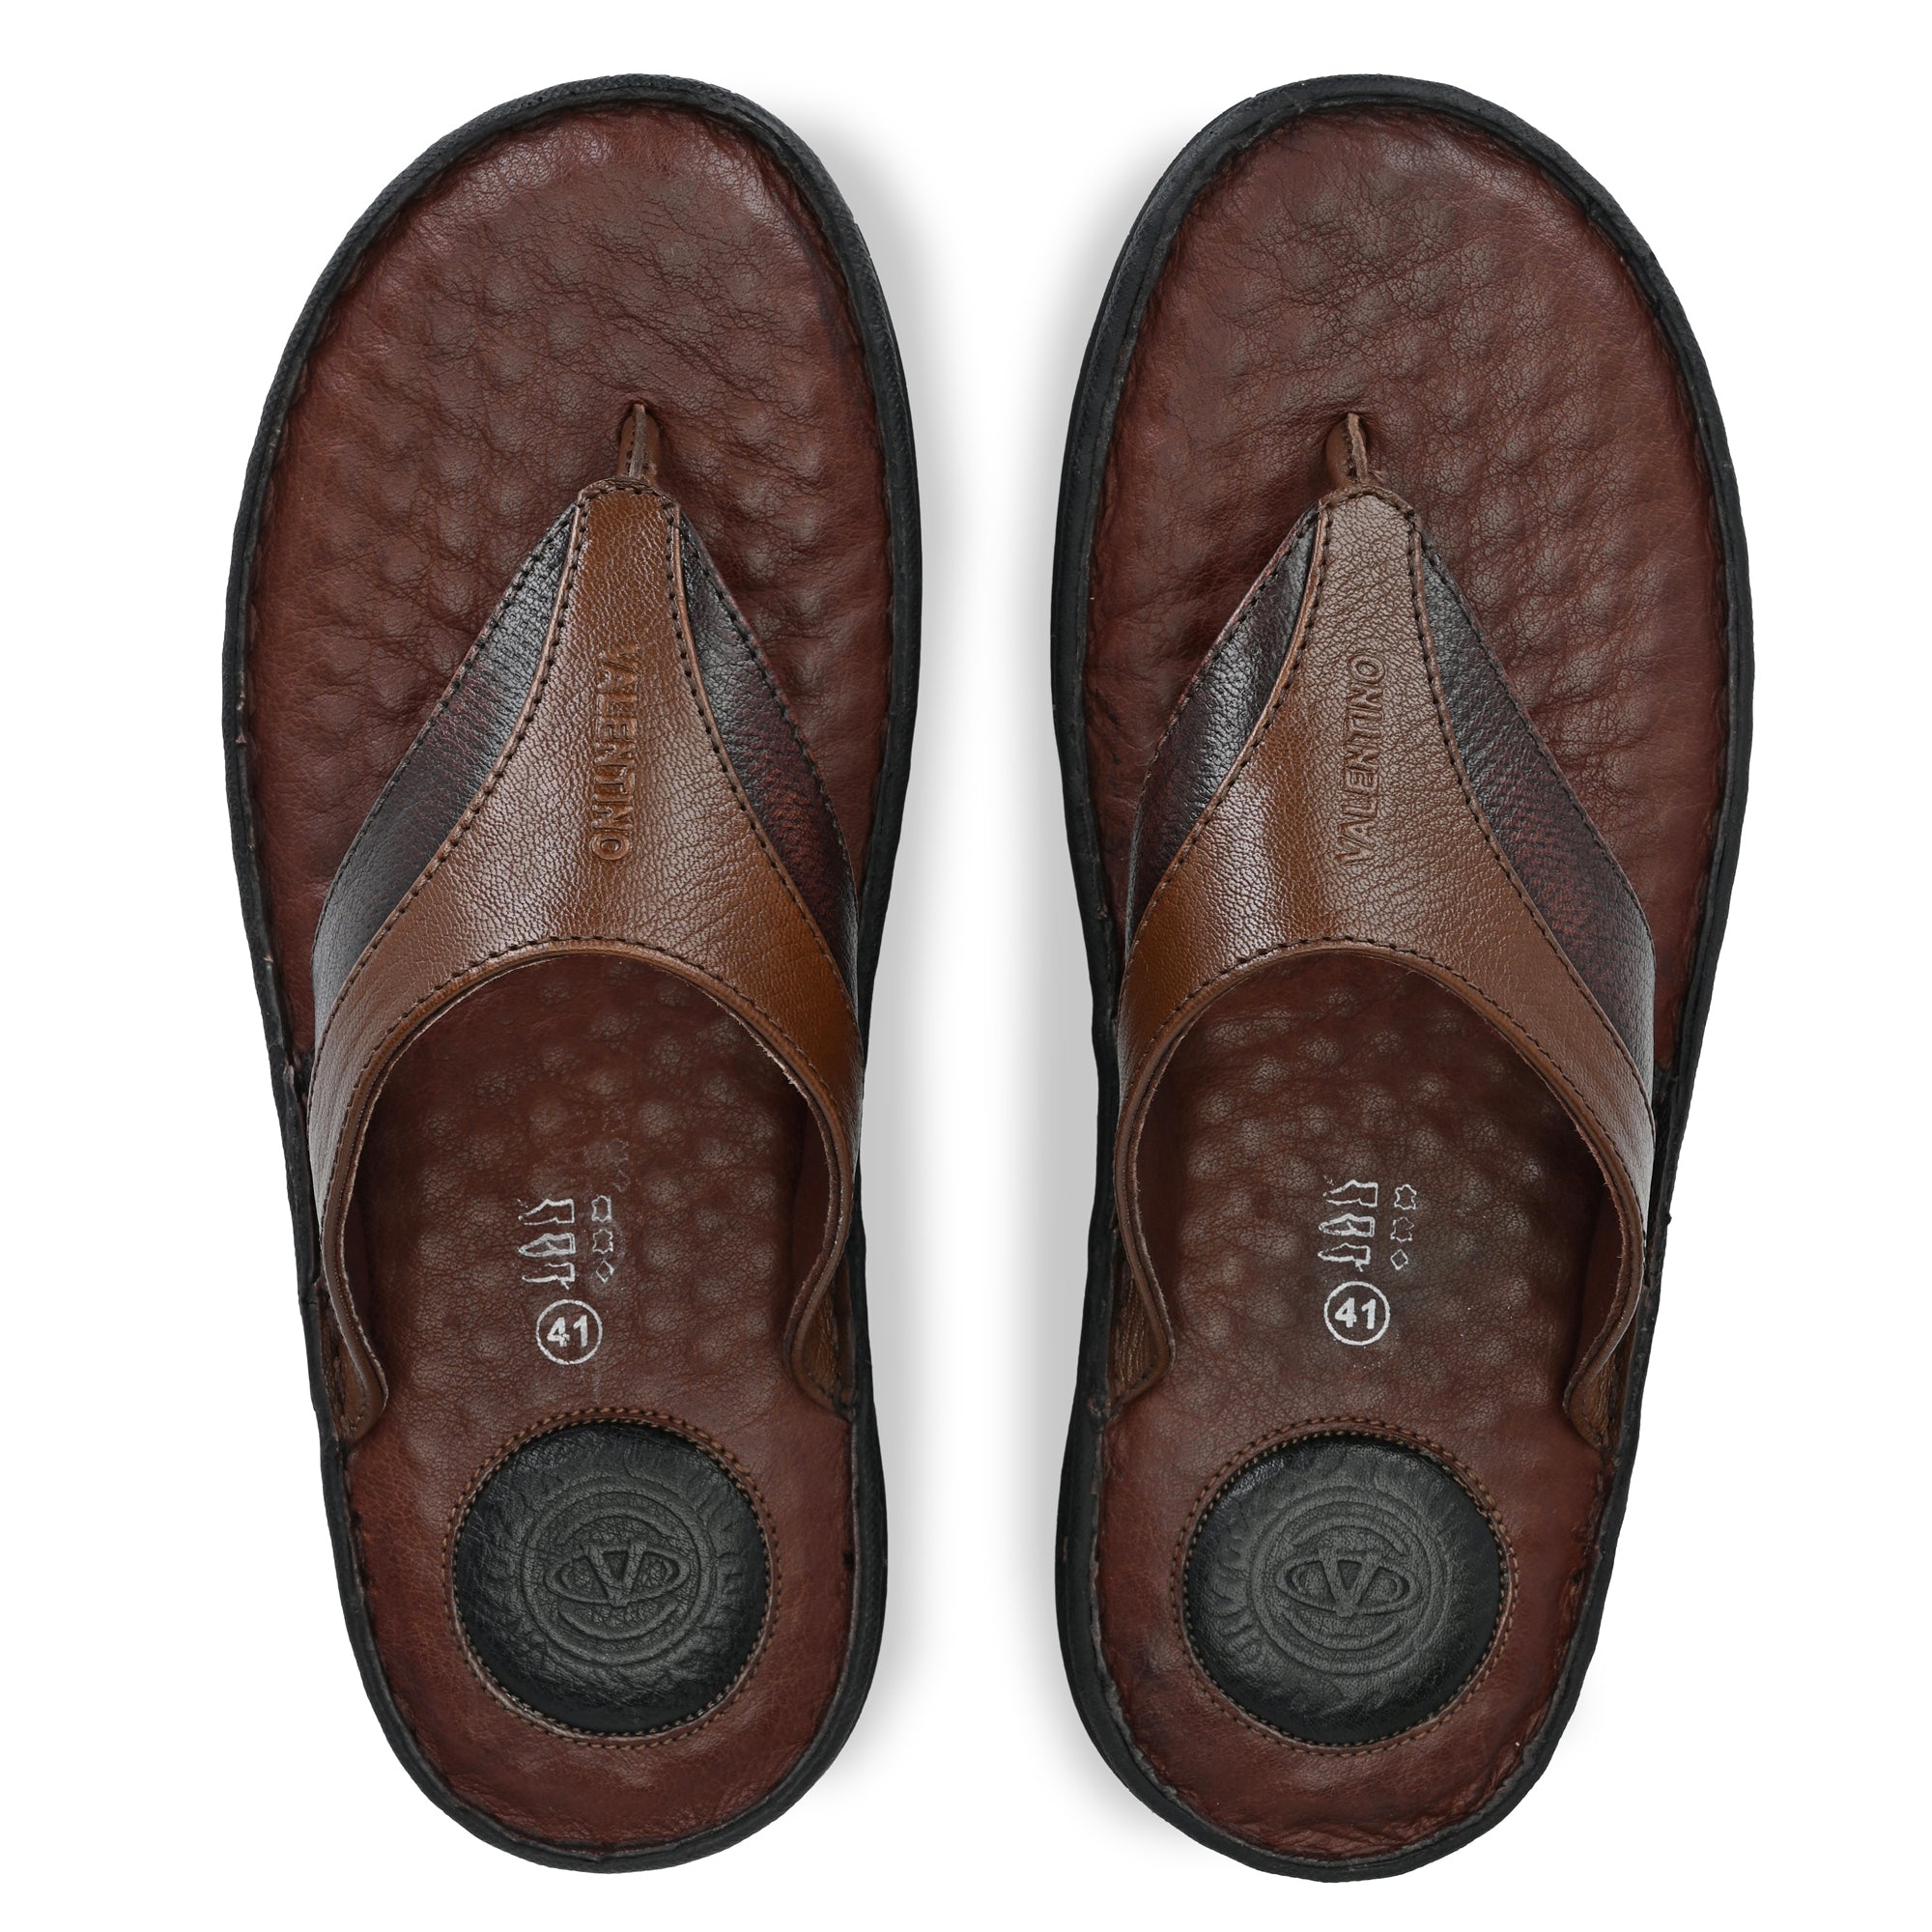 CHALLENGE-06 MEN LEATHER MOCCA/CHERRY CASUAL SLIPPER